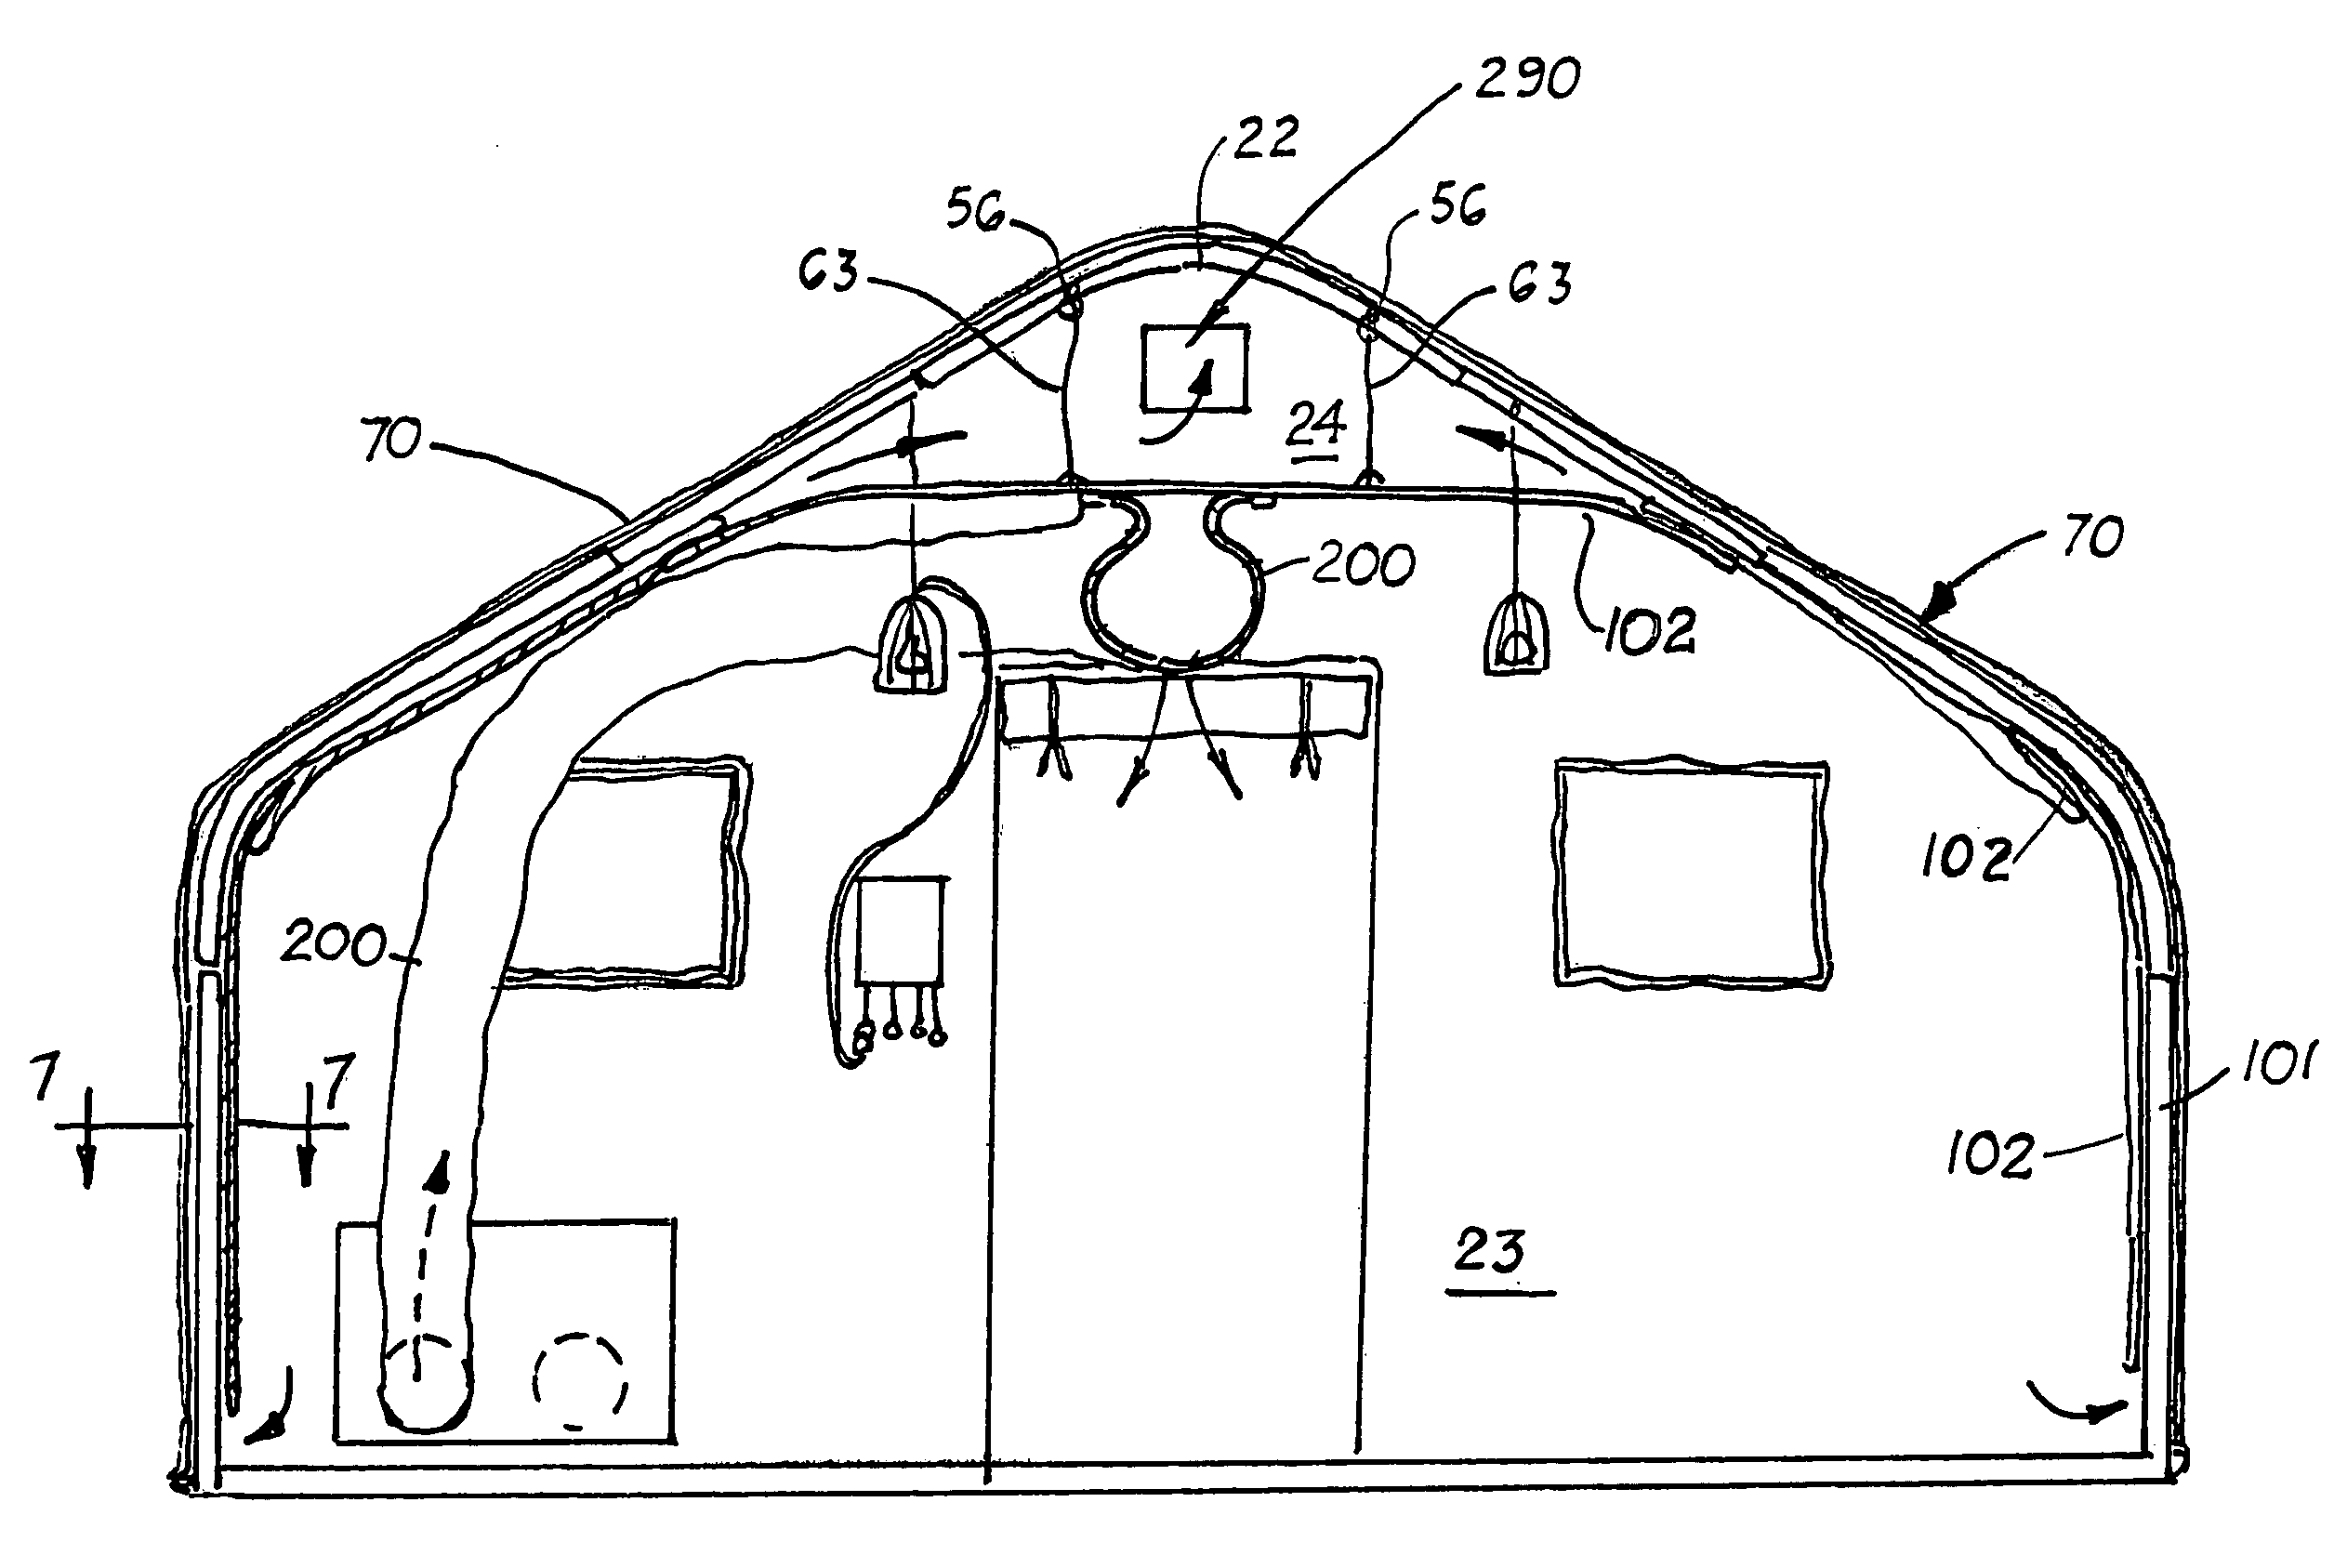 Compact, all-weather temporary shelter